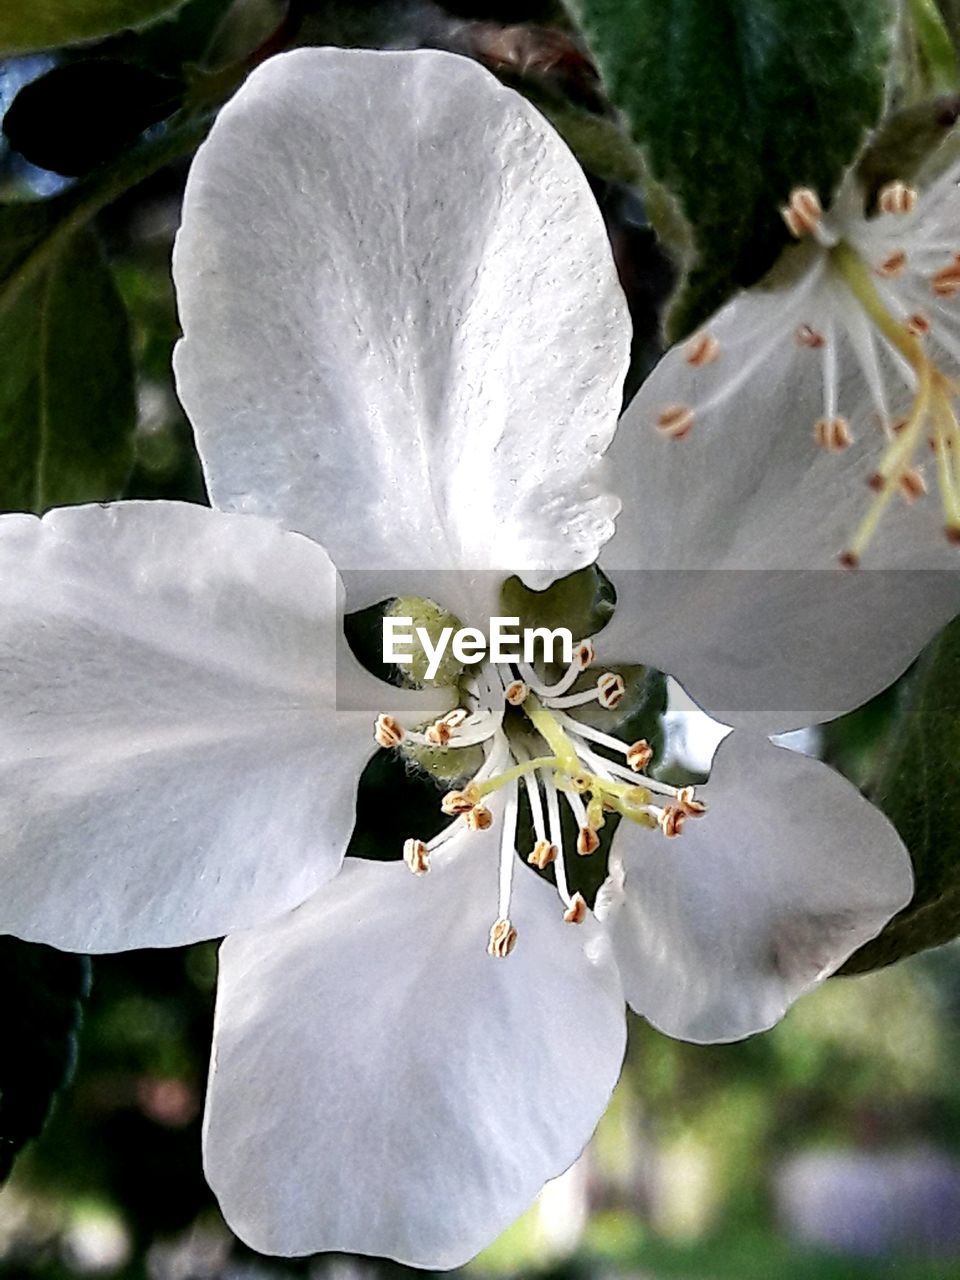 CLOSE-UP OF FRESH WHITE FLOWER BLOOMING IN PARK